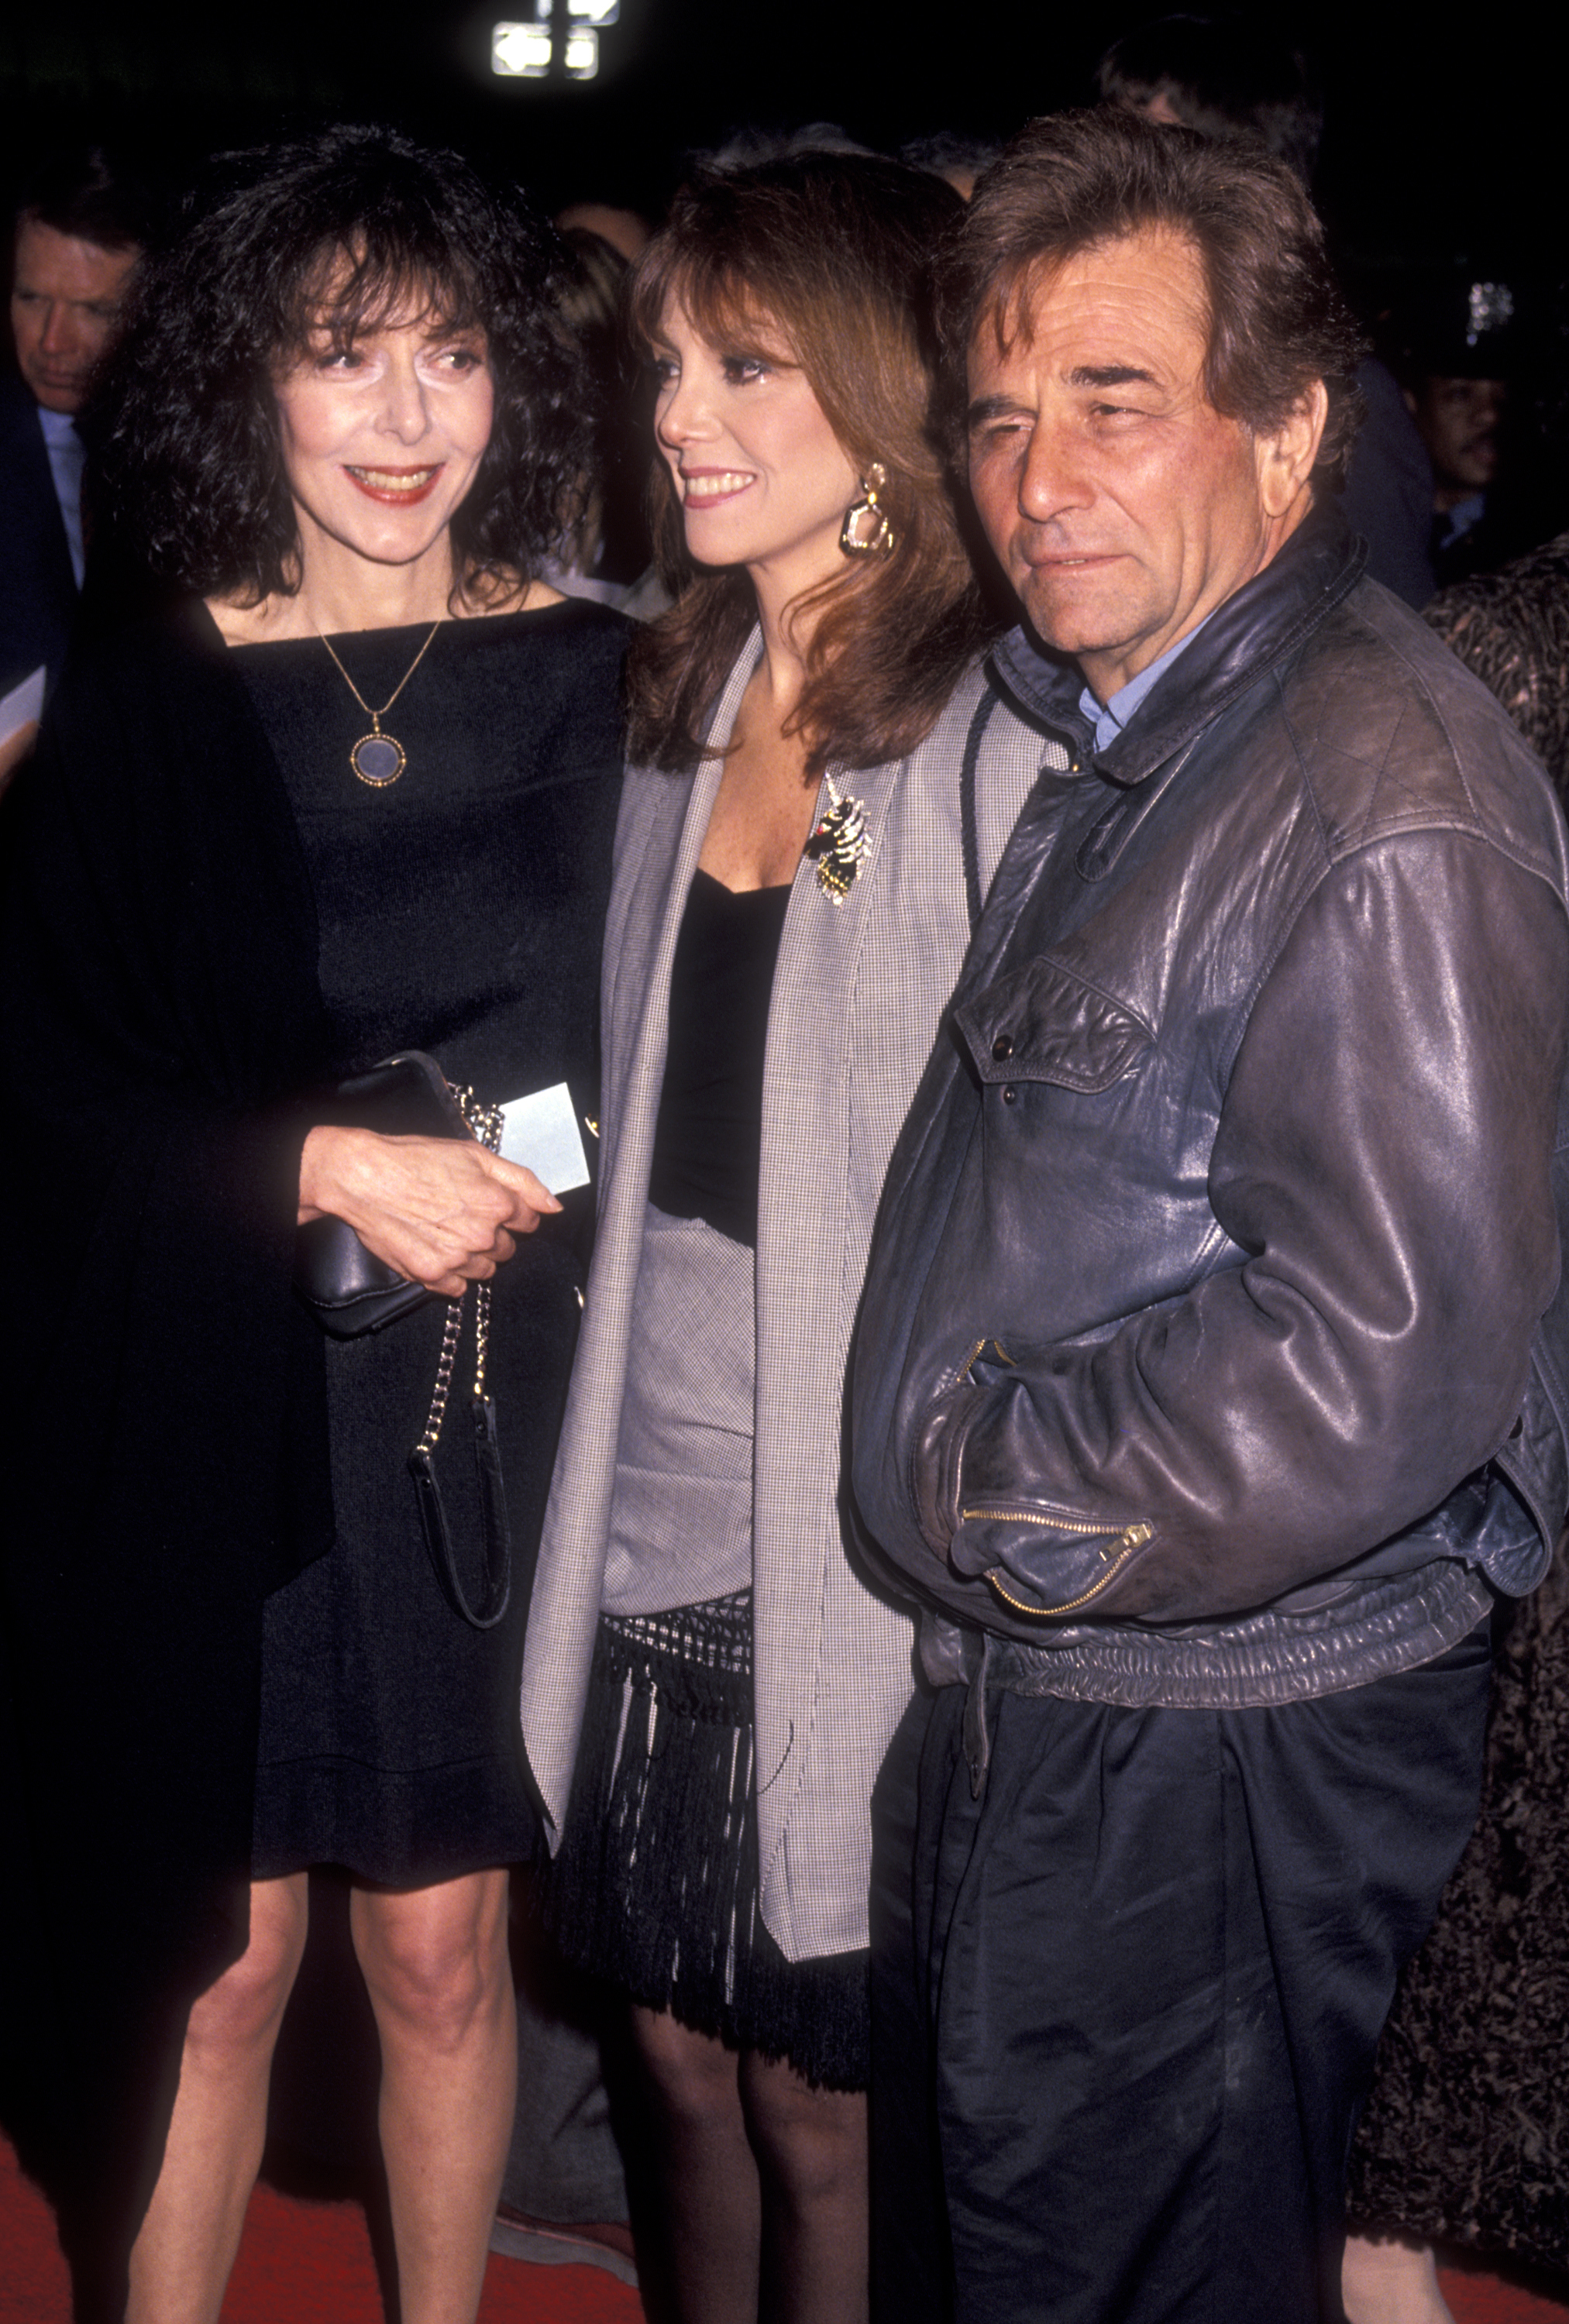 Actors Elaine May, Peter Falk, and Marlo Thomas at the premiere of "In The Spirit" on April 3, 1990, at Loew's Tower Theater in New York | Source: Getty Images